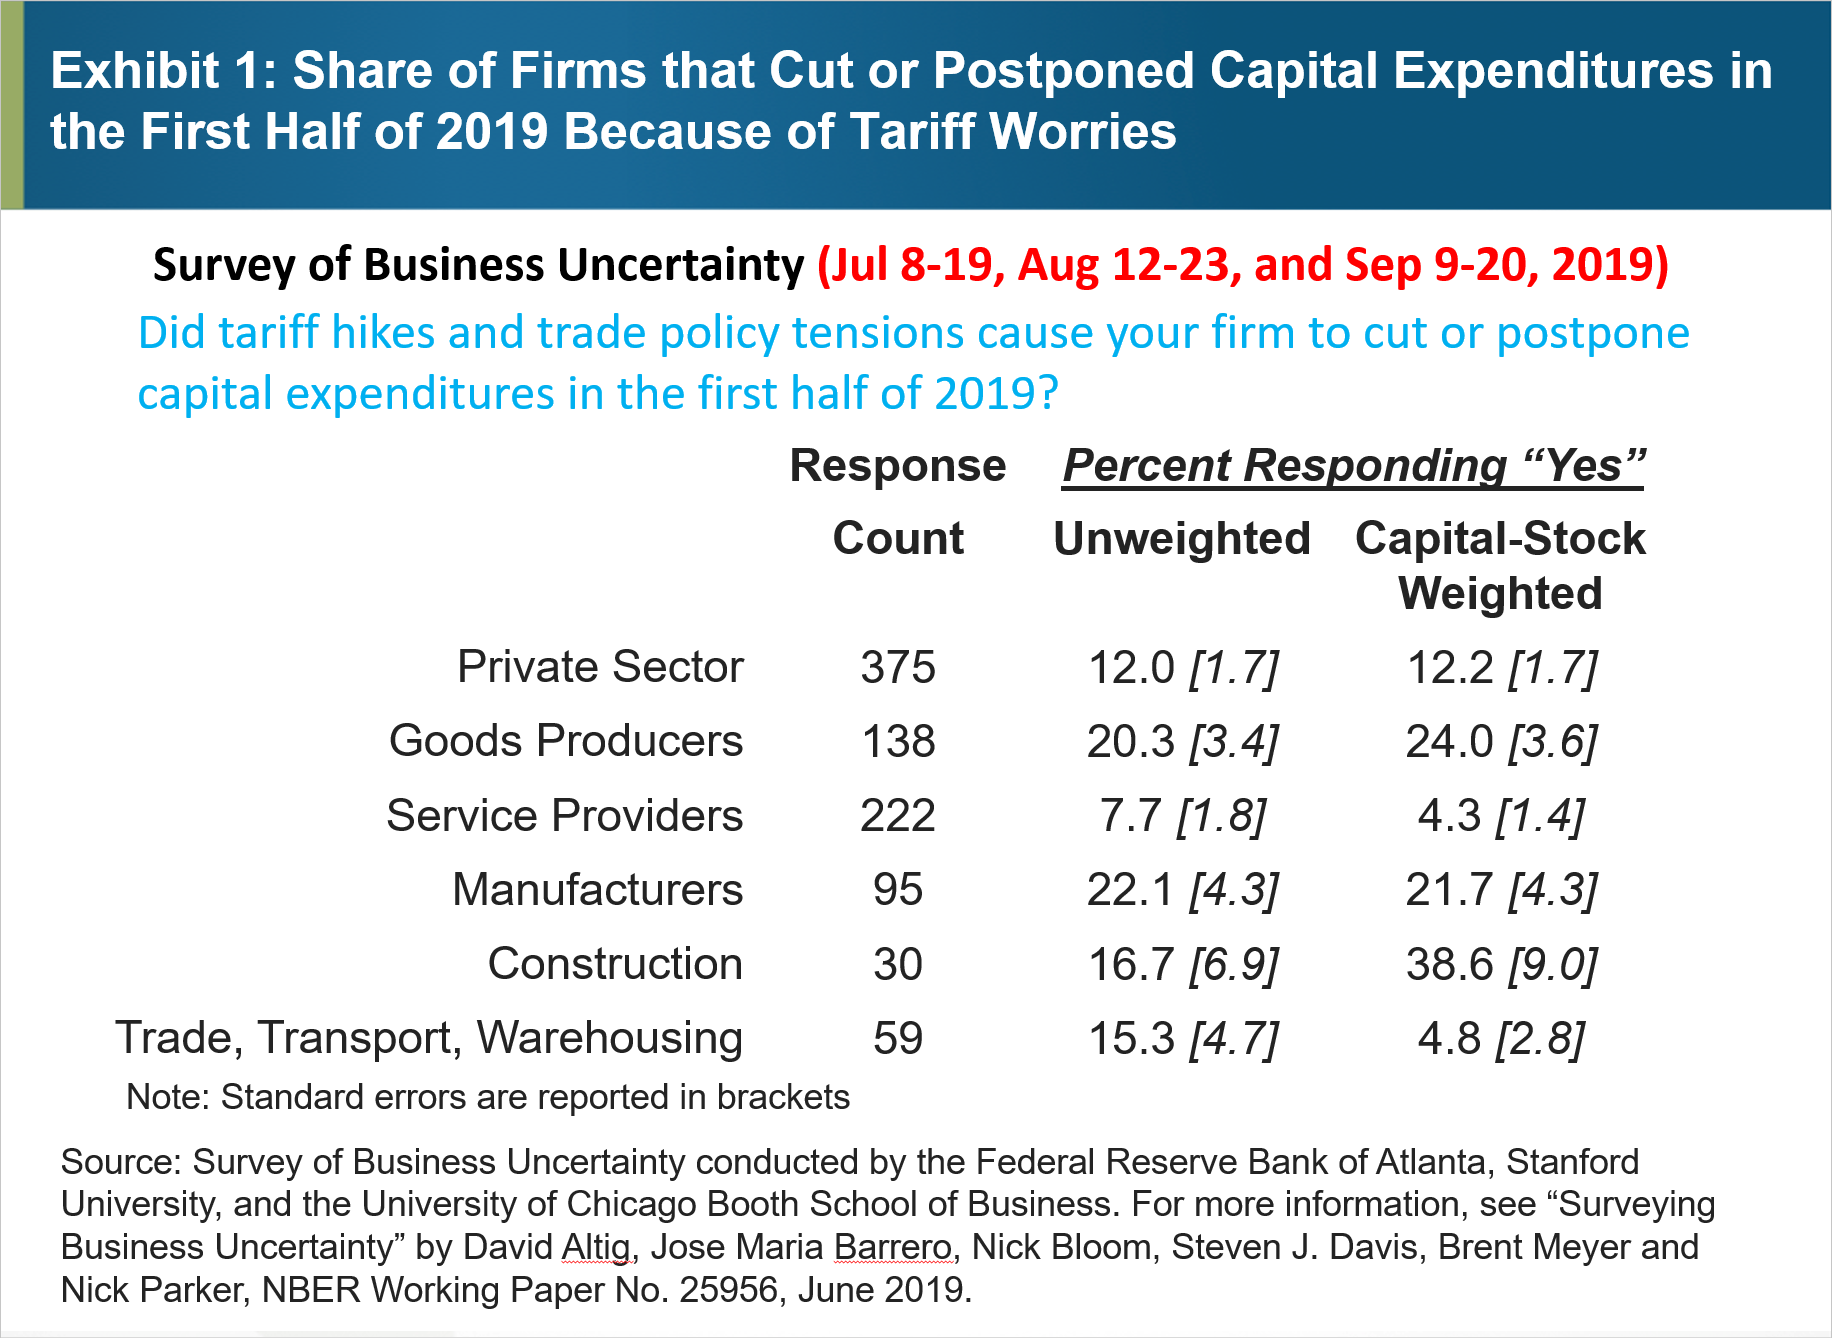 Exhibit 1: Share of Firms that Cut or Postponed Capital Expenditures in the First Half of 2019 Because of Tariff Worries